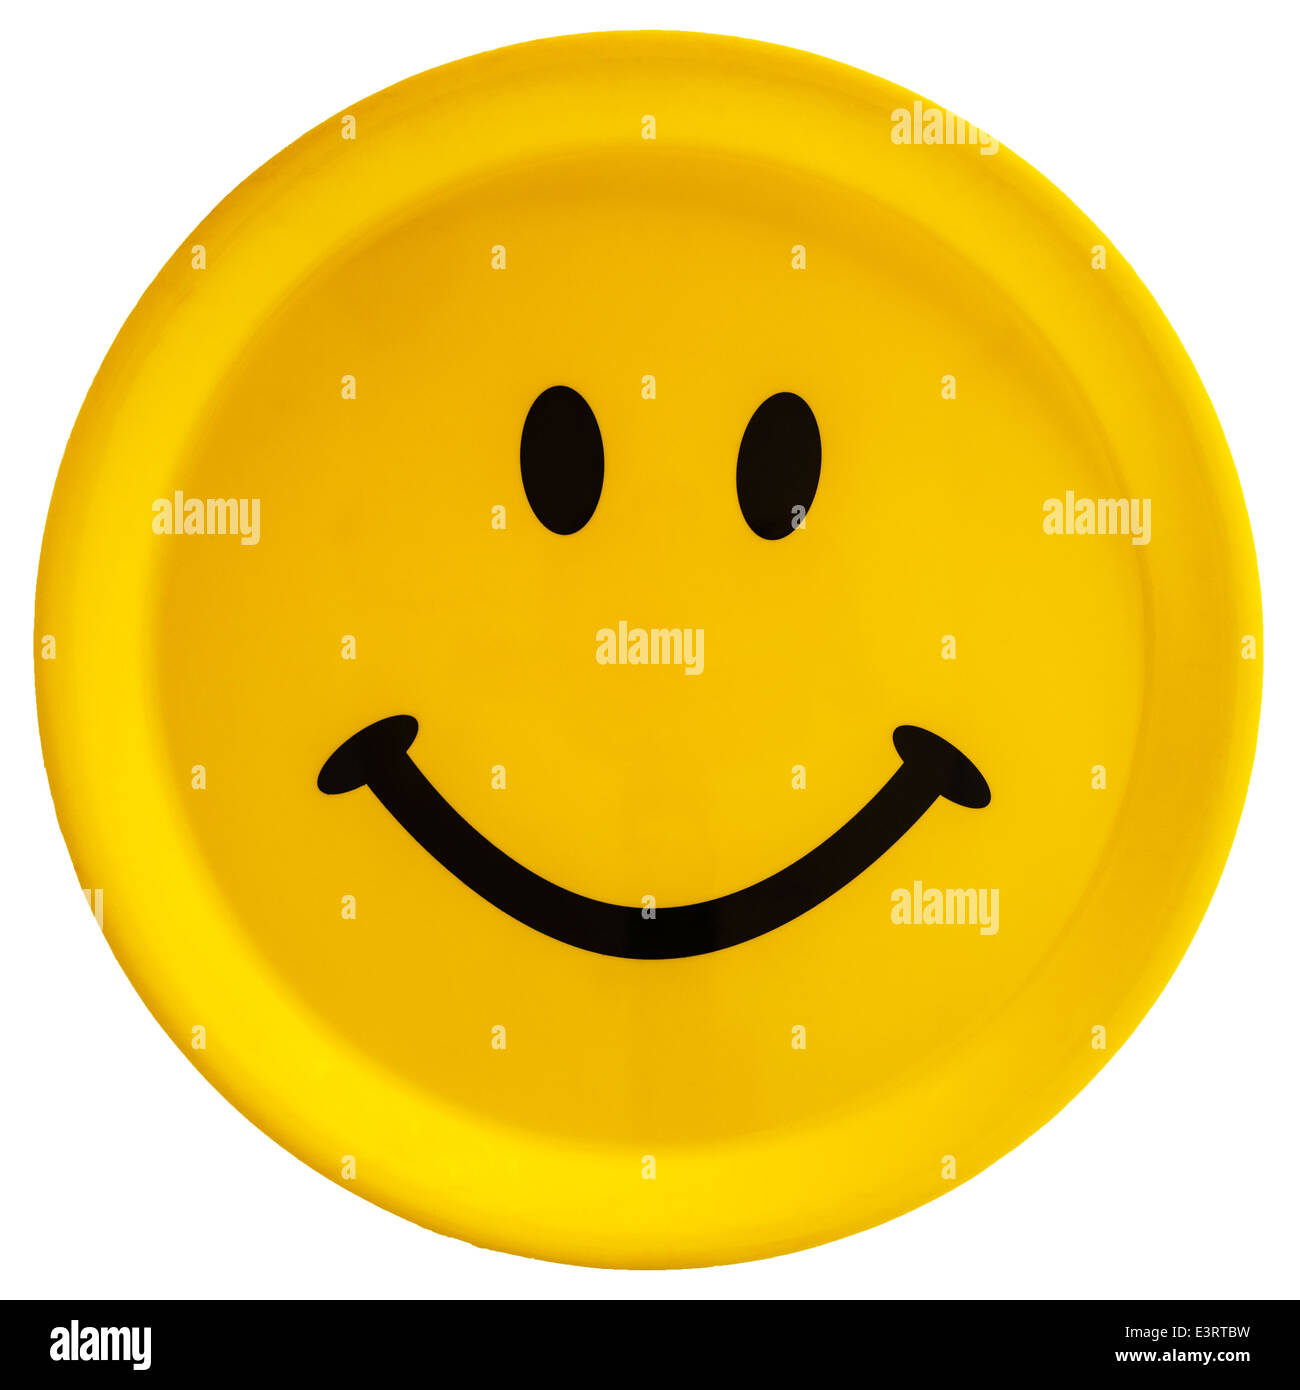 A Smiley face cutout on a white background Stock Photo